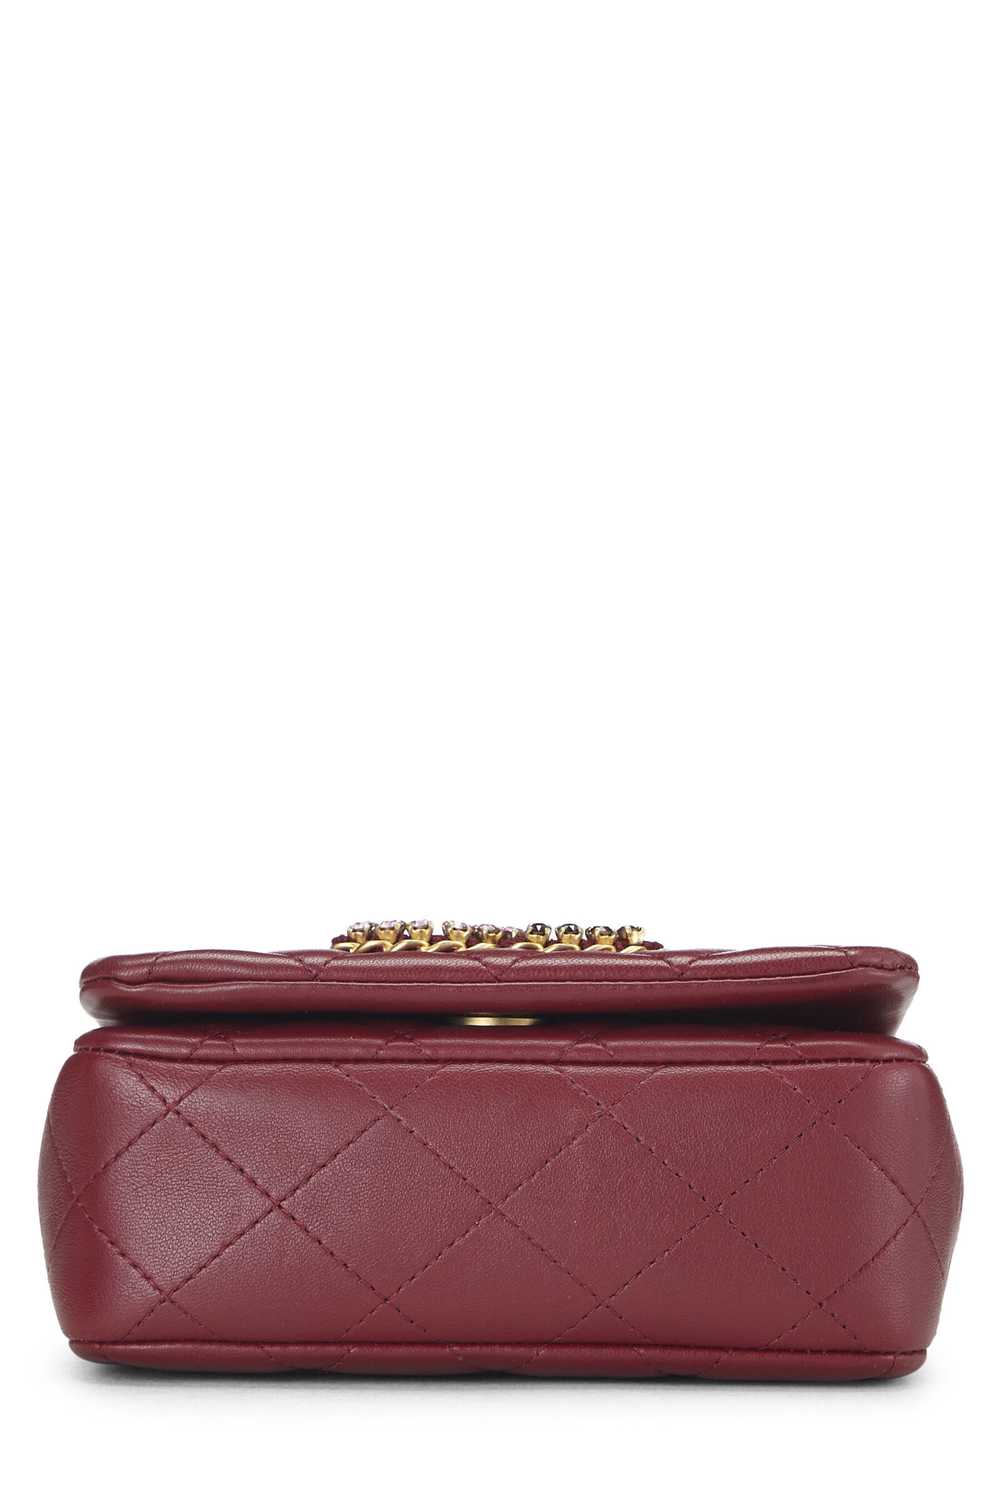 Burgundy Quilted Lambskin Crystal Flap Bag Mini - image 5